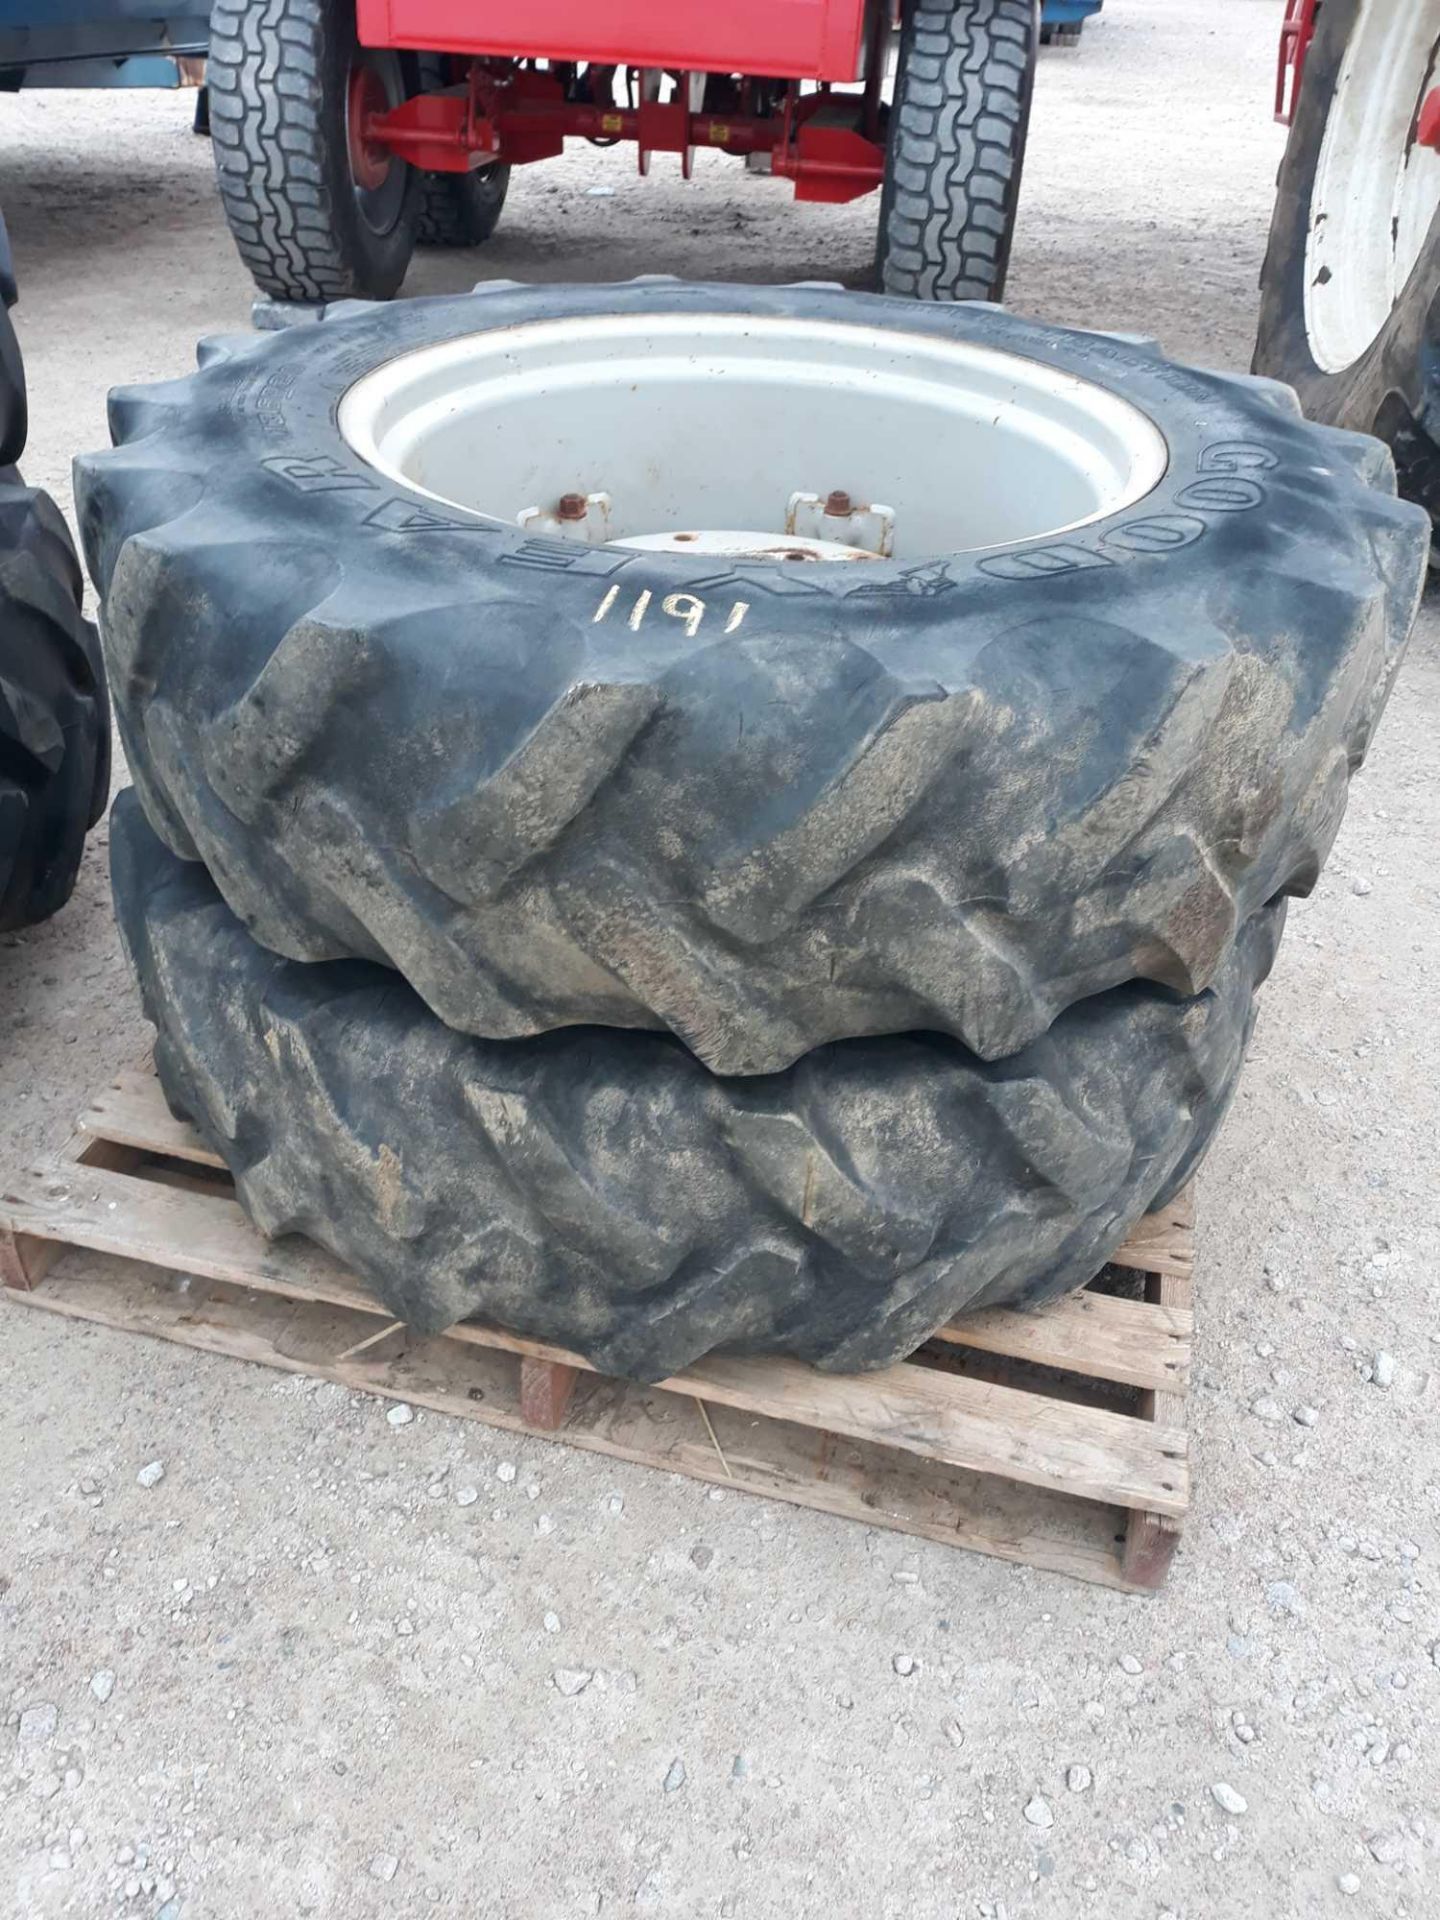 13.6 X 28 TRACTOR FRONT WHEELS & TYRES - Image 2 of 2